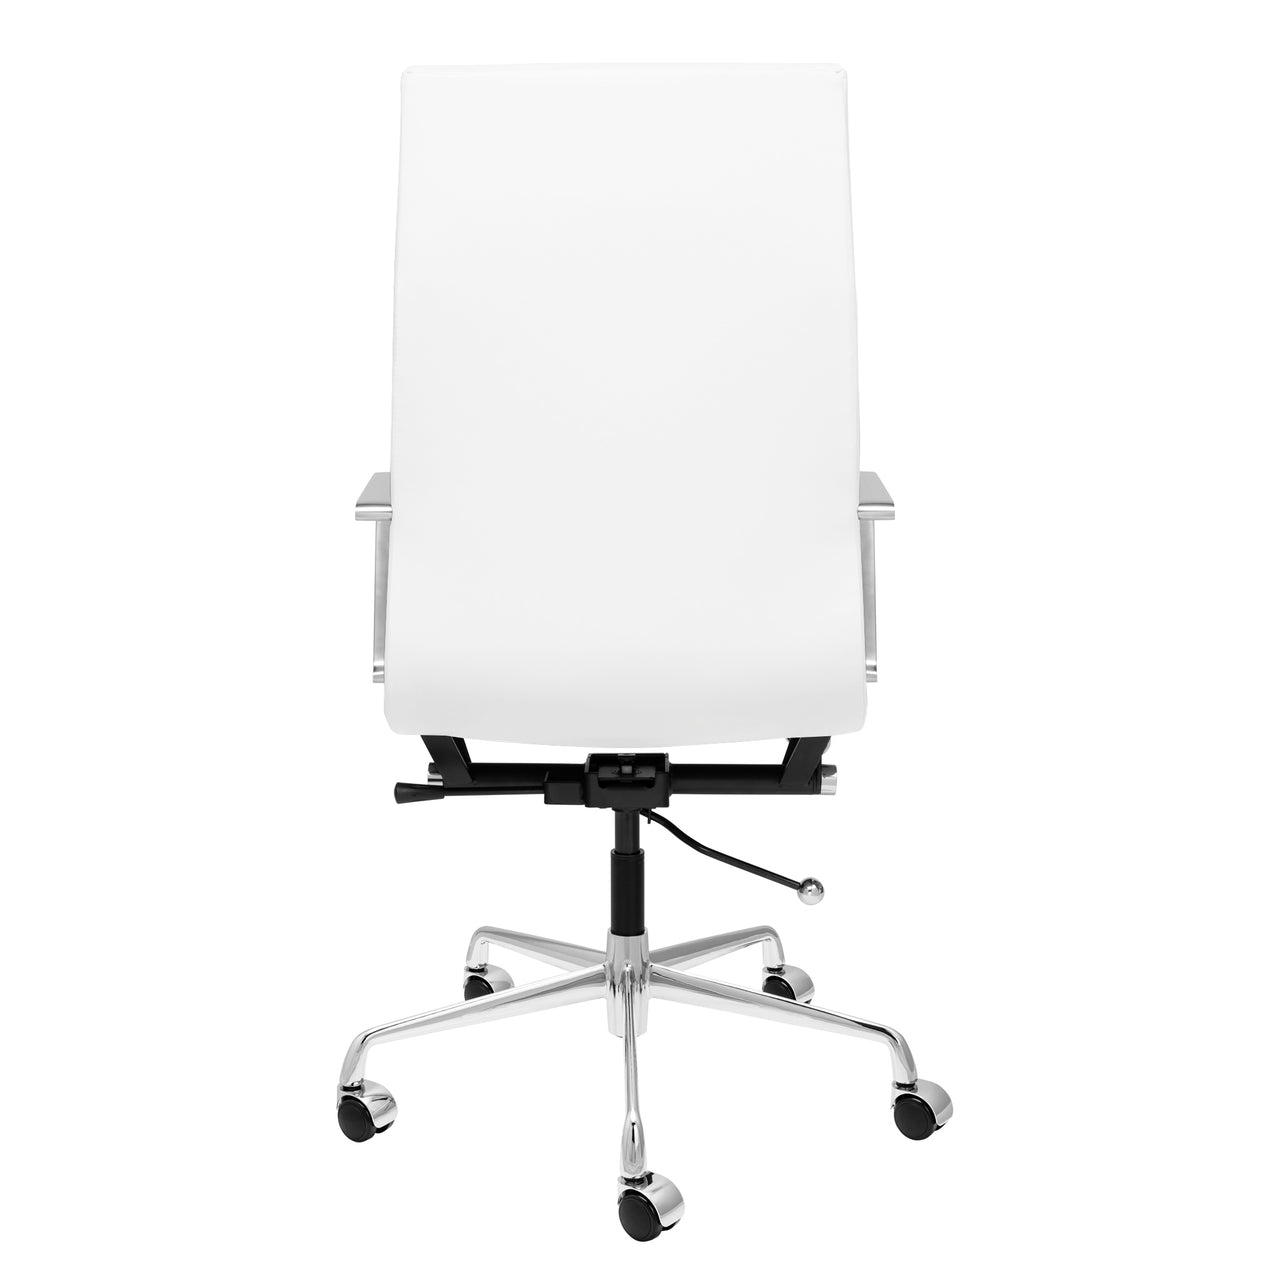 SOHO II Tall Back Ribbed Management Chair (White)